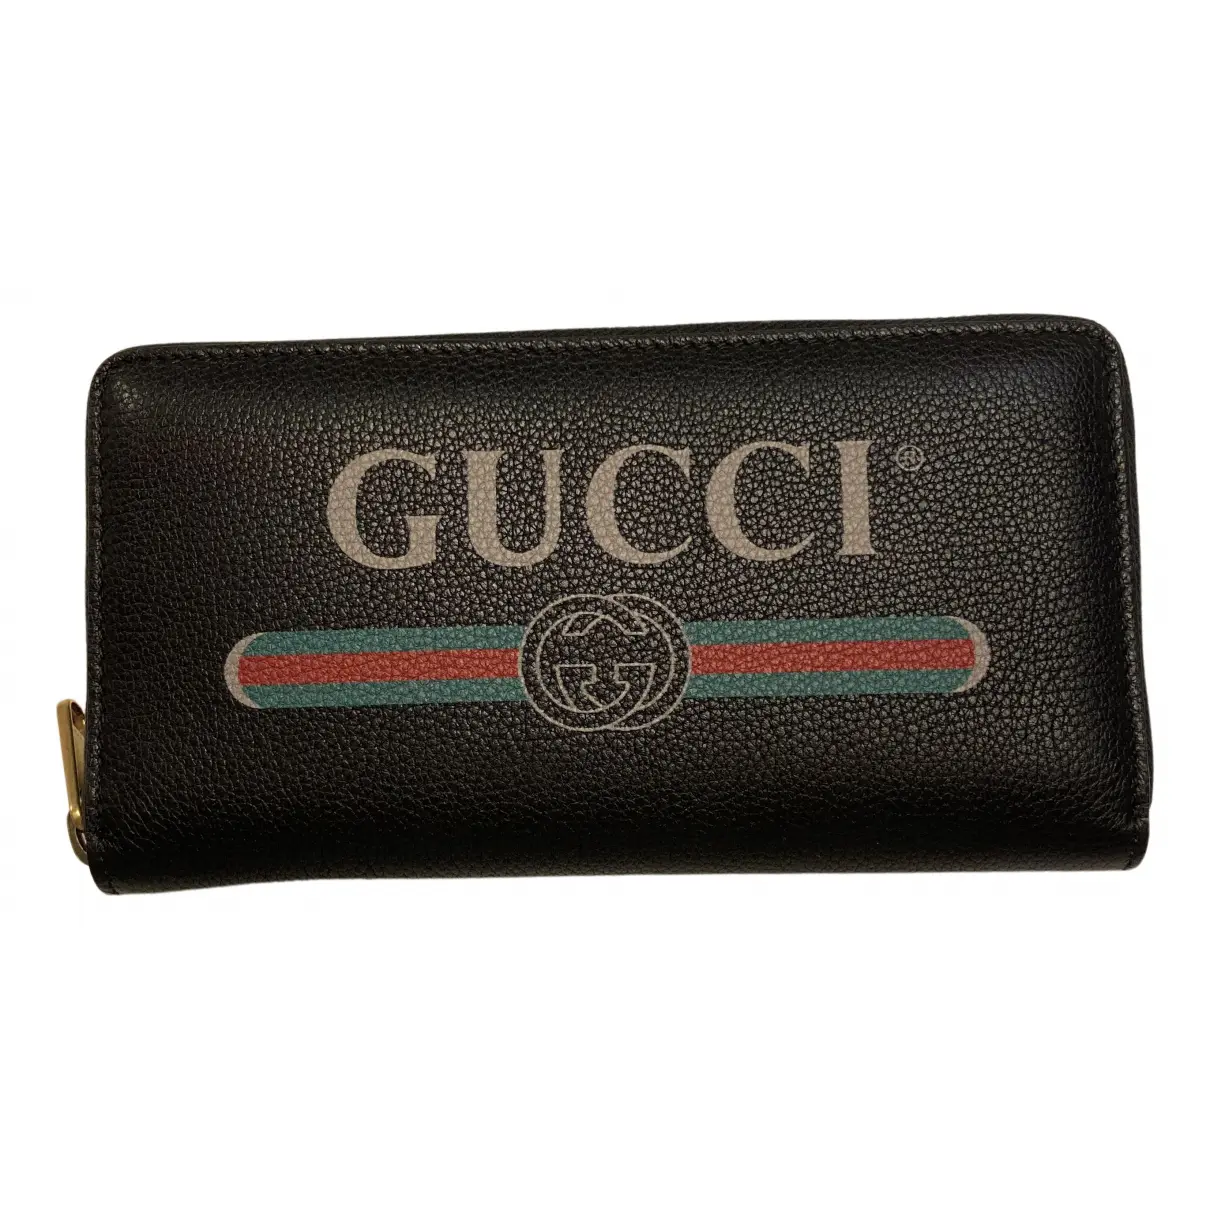 Leather wallet Gucci